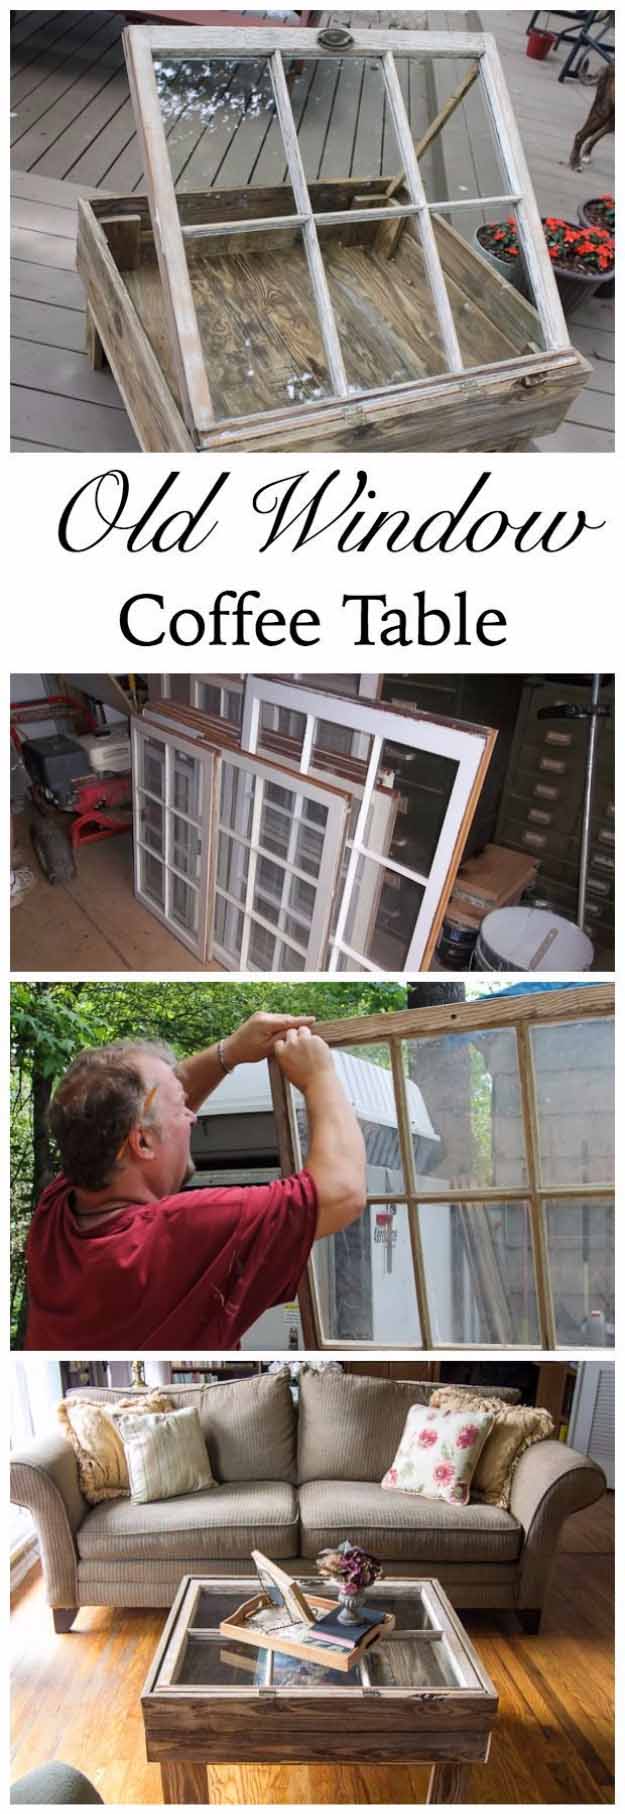 Easy DIY Furniture Ideas | Upcycling Projects with Old Windows | DIY Rustic Coffee Table Ideas | DIY Projects and Crafts by DIY JOY  at http://diyjoy.com/diy-home-decor-coffee-table-ideas